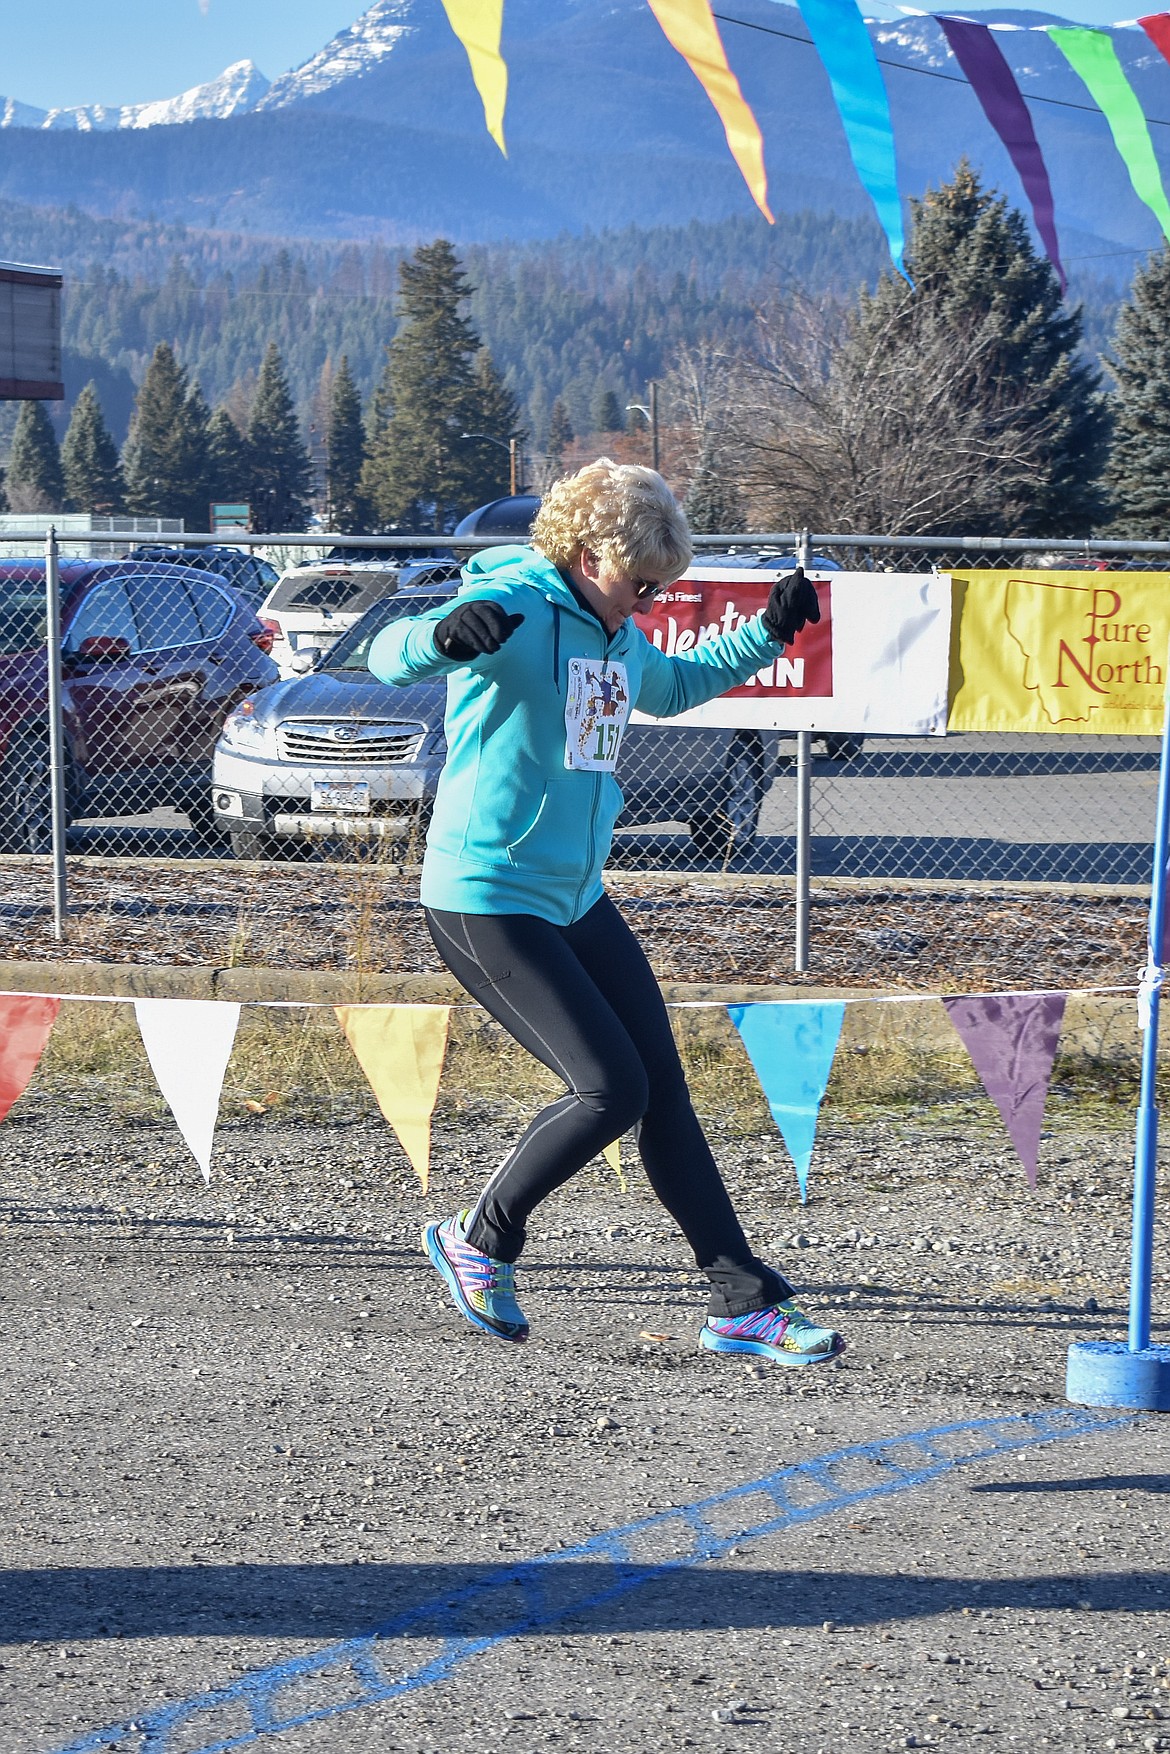 Debbie Mickelson adds a little spring to her step as she crosses the finish line during the Turkey Dash 5k fun run. (Ben Kibbey/The Western News)